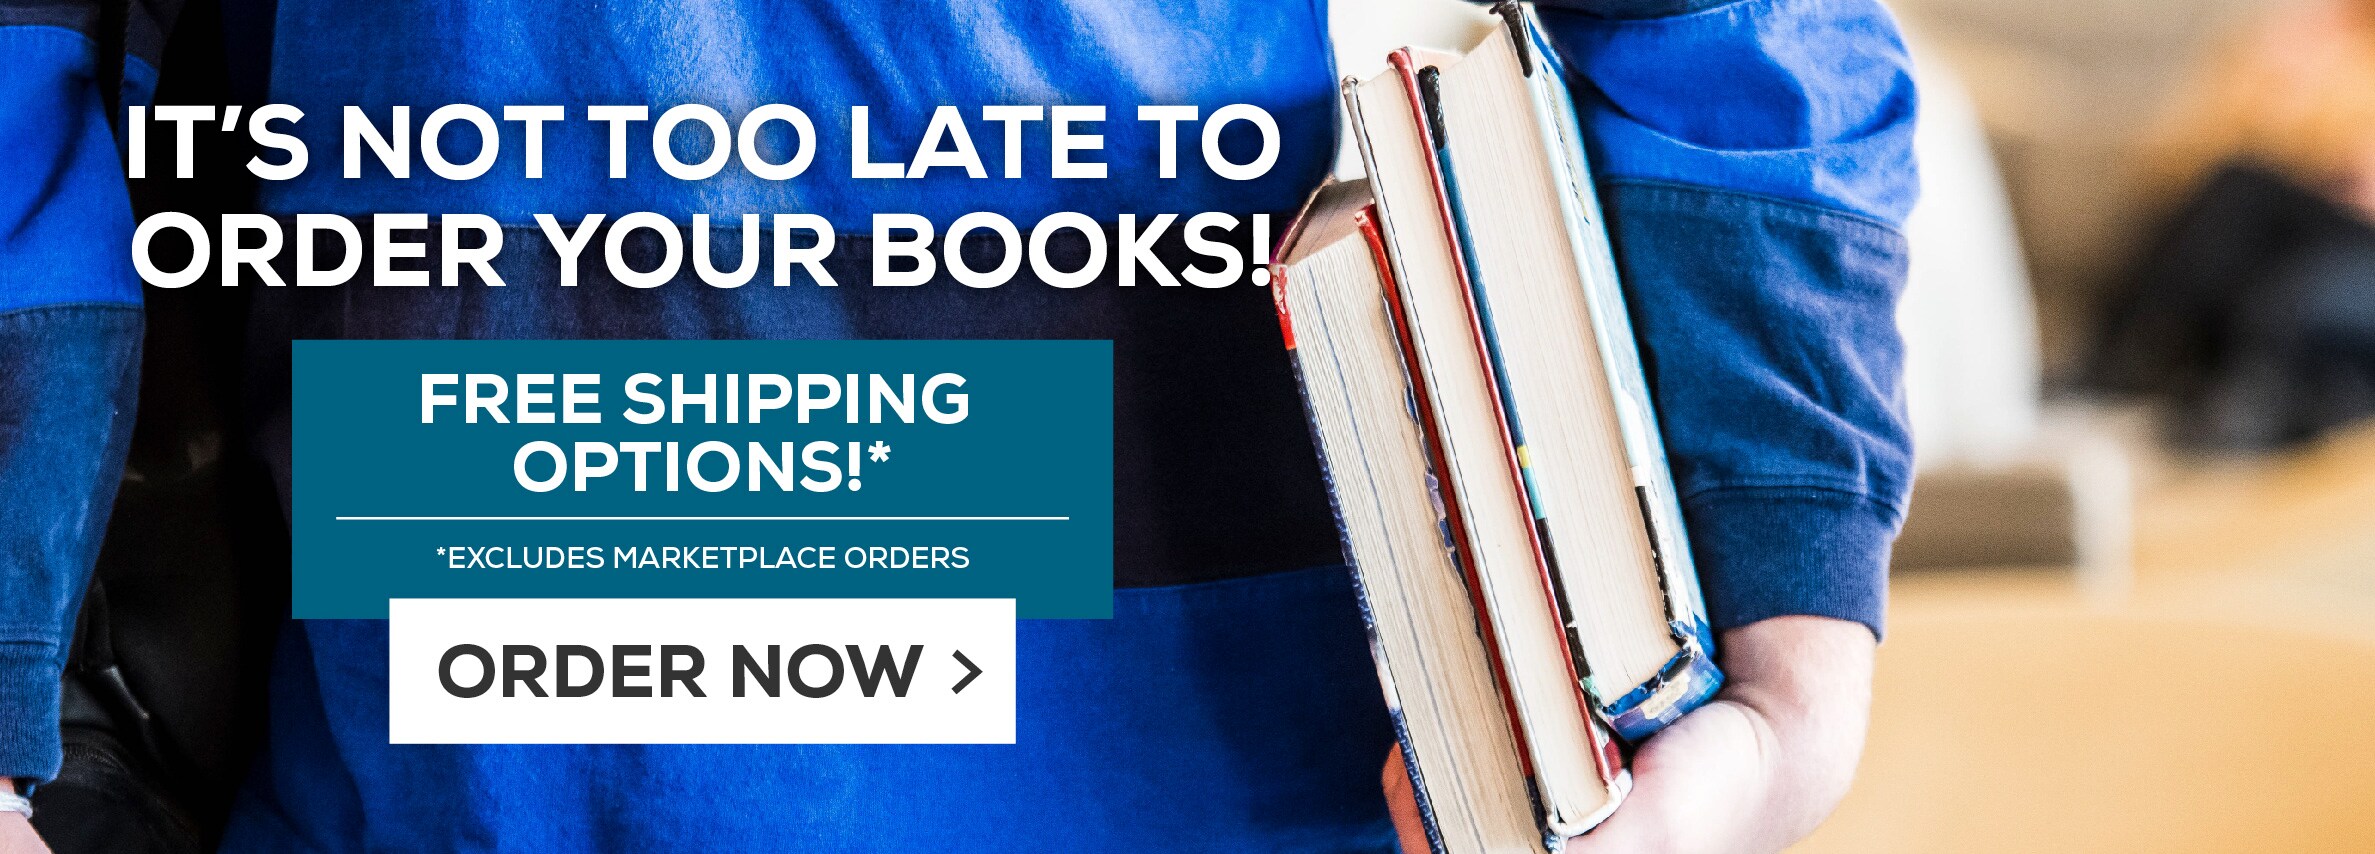 Itâ€™s not too late to order your books! Free shipping options!* Excludes marketplace purchases. Order Now.